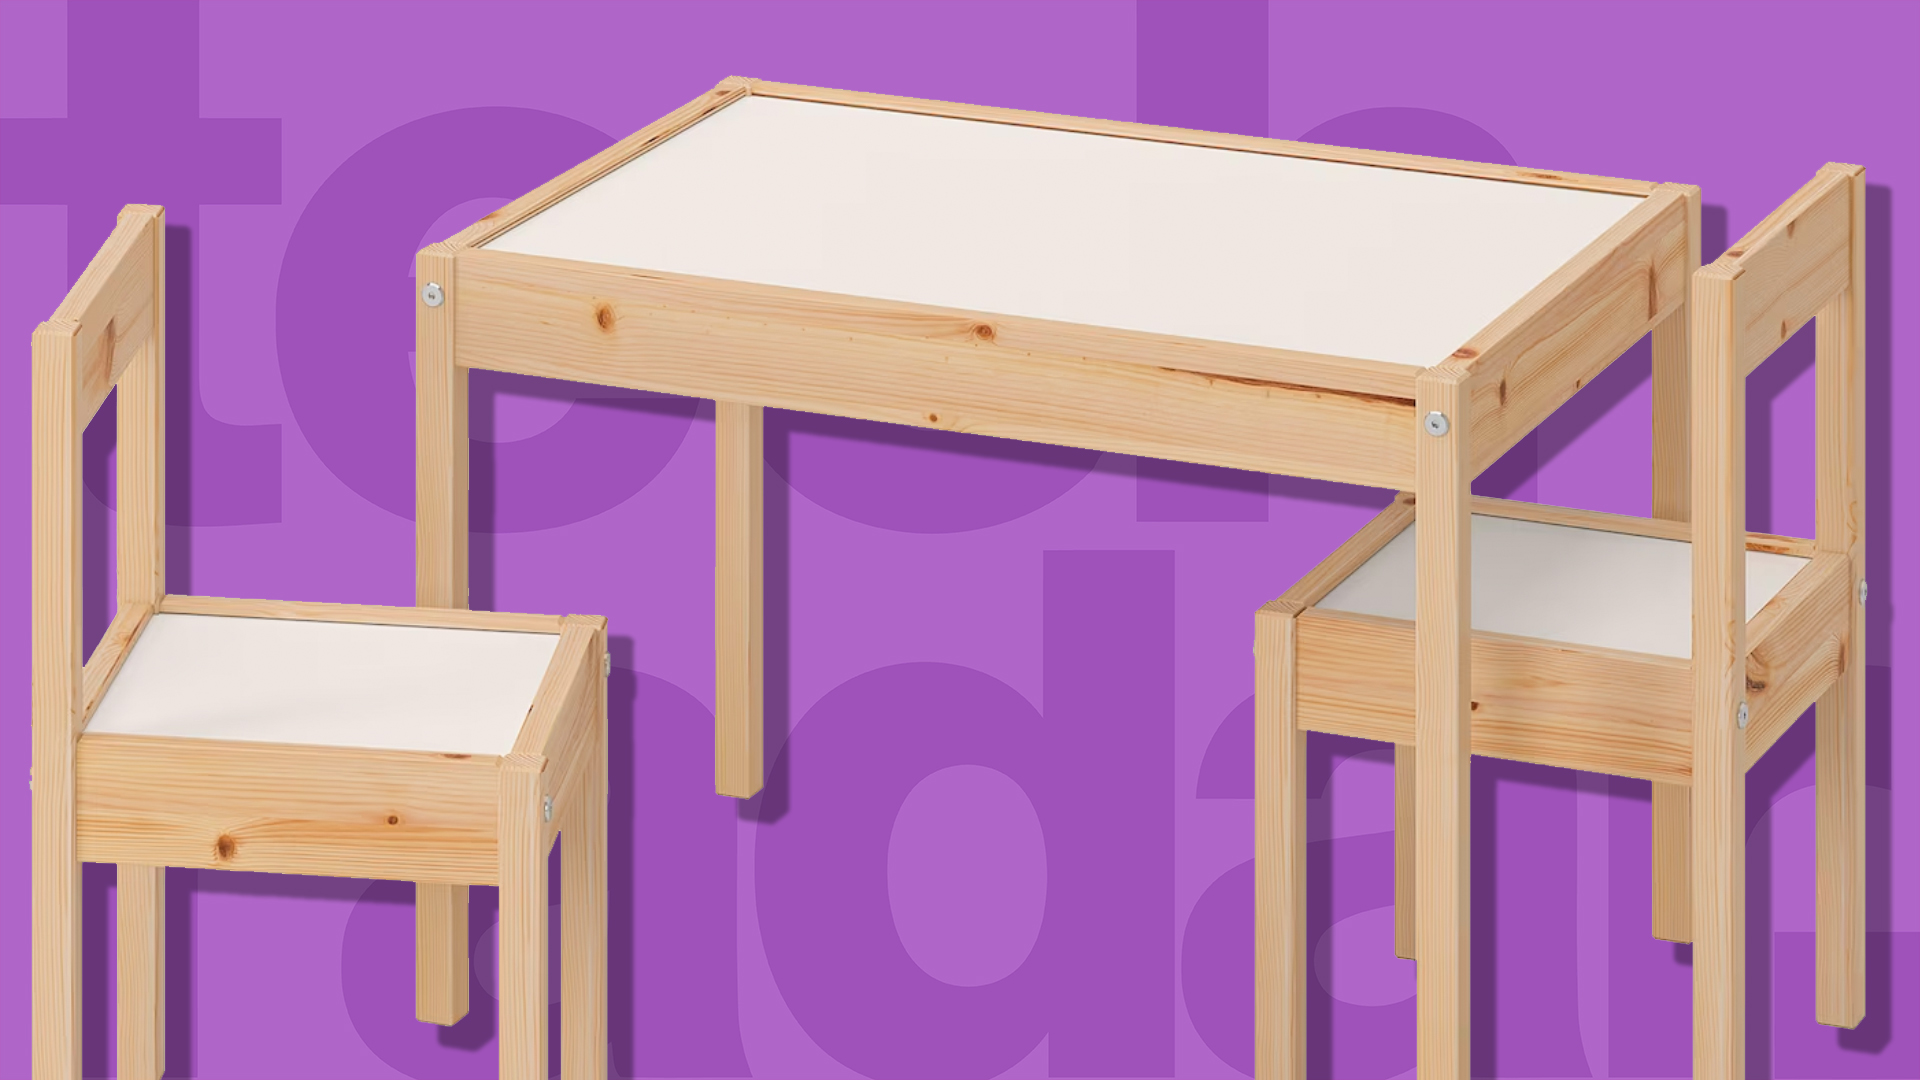 Computer Small Student School Writing Desk 31 inch,Work Home